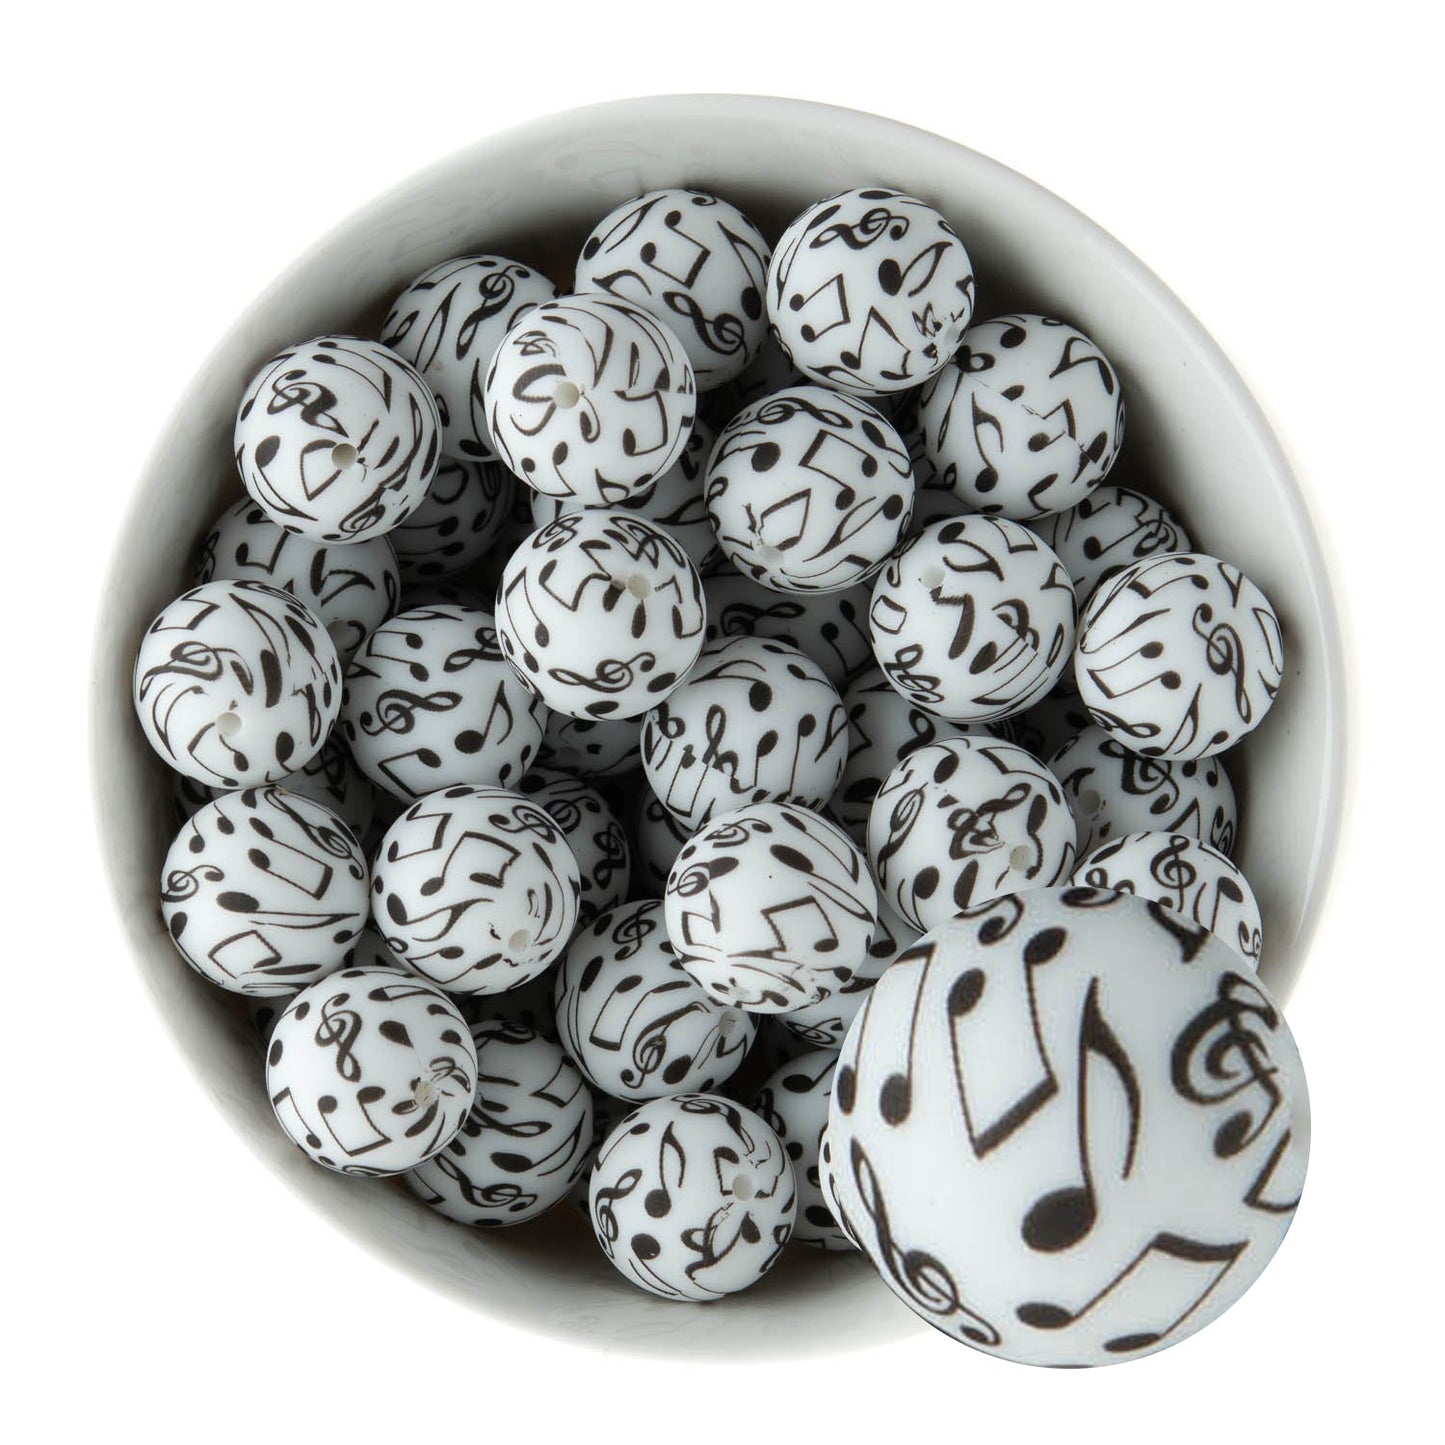 Standard Silicone Print Beads